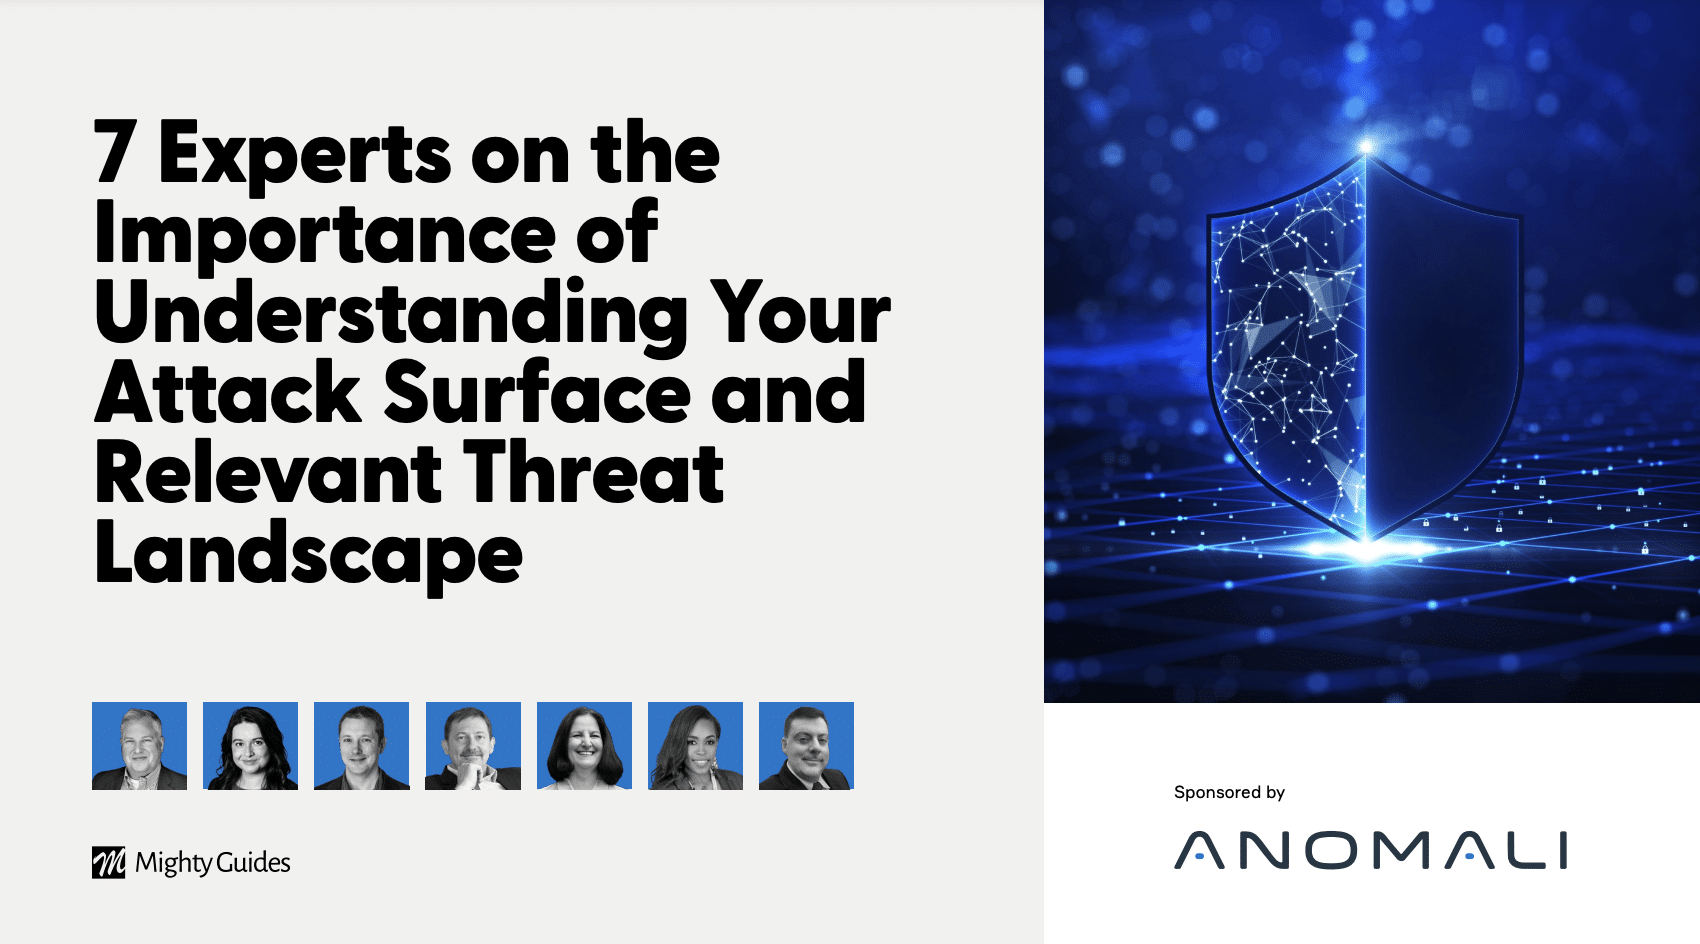 Anomali: 7 Experts on the Importance of Understanding Your Attack Surface and Relevant Threat Landscape